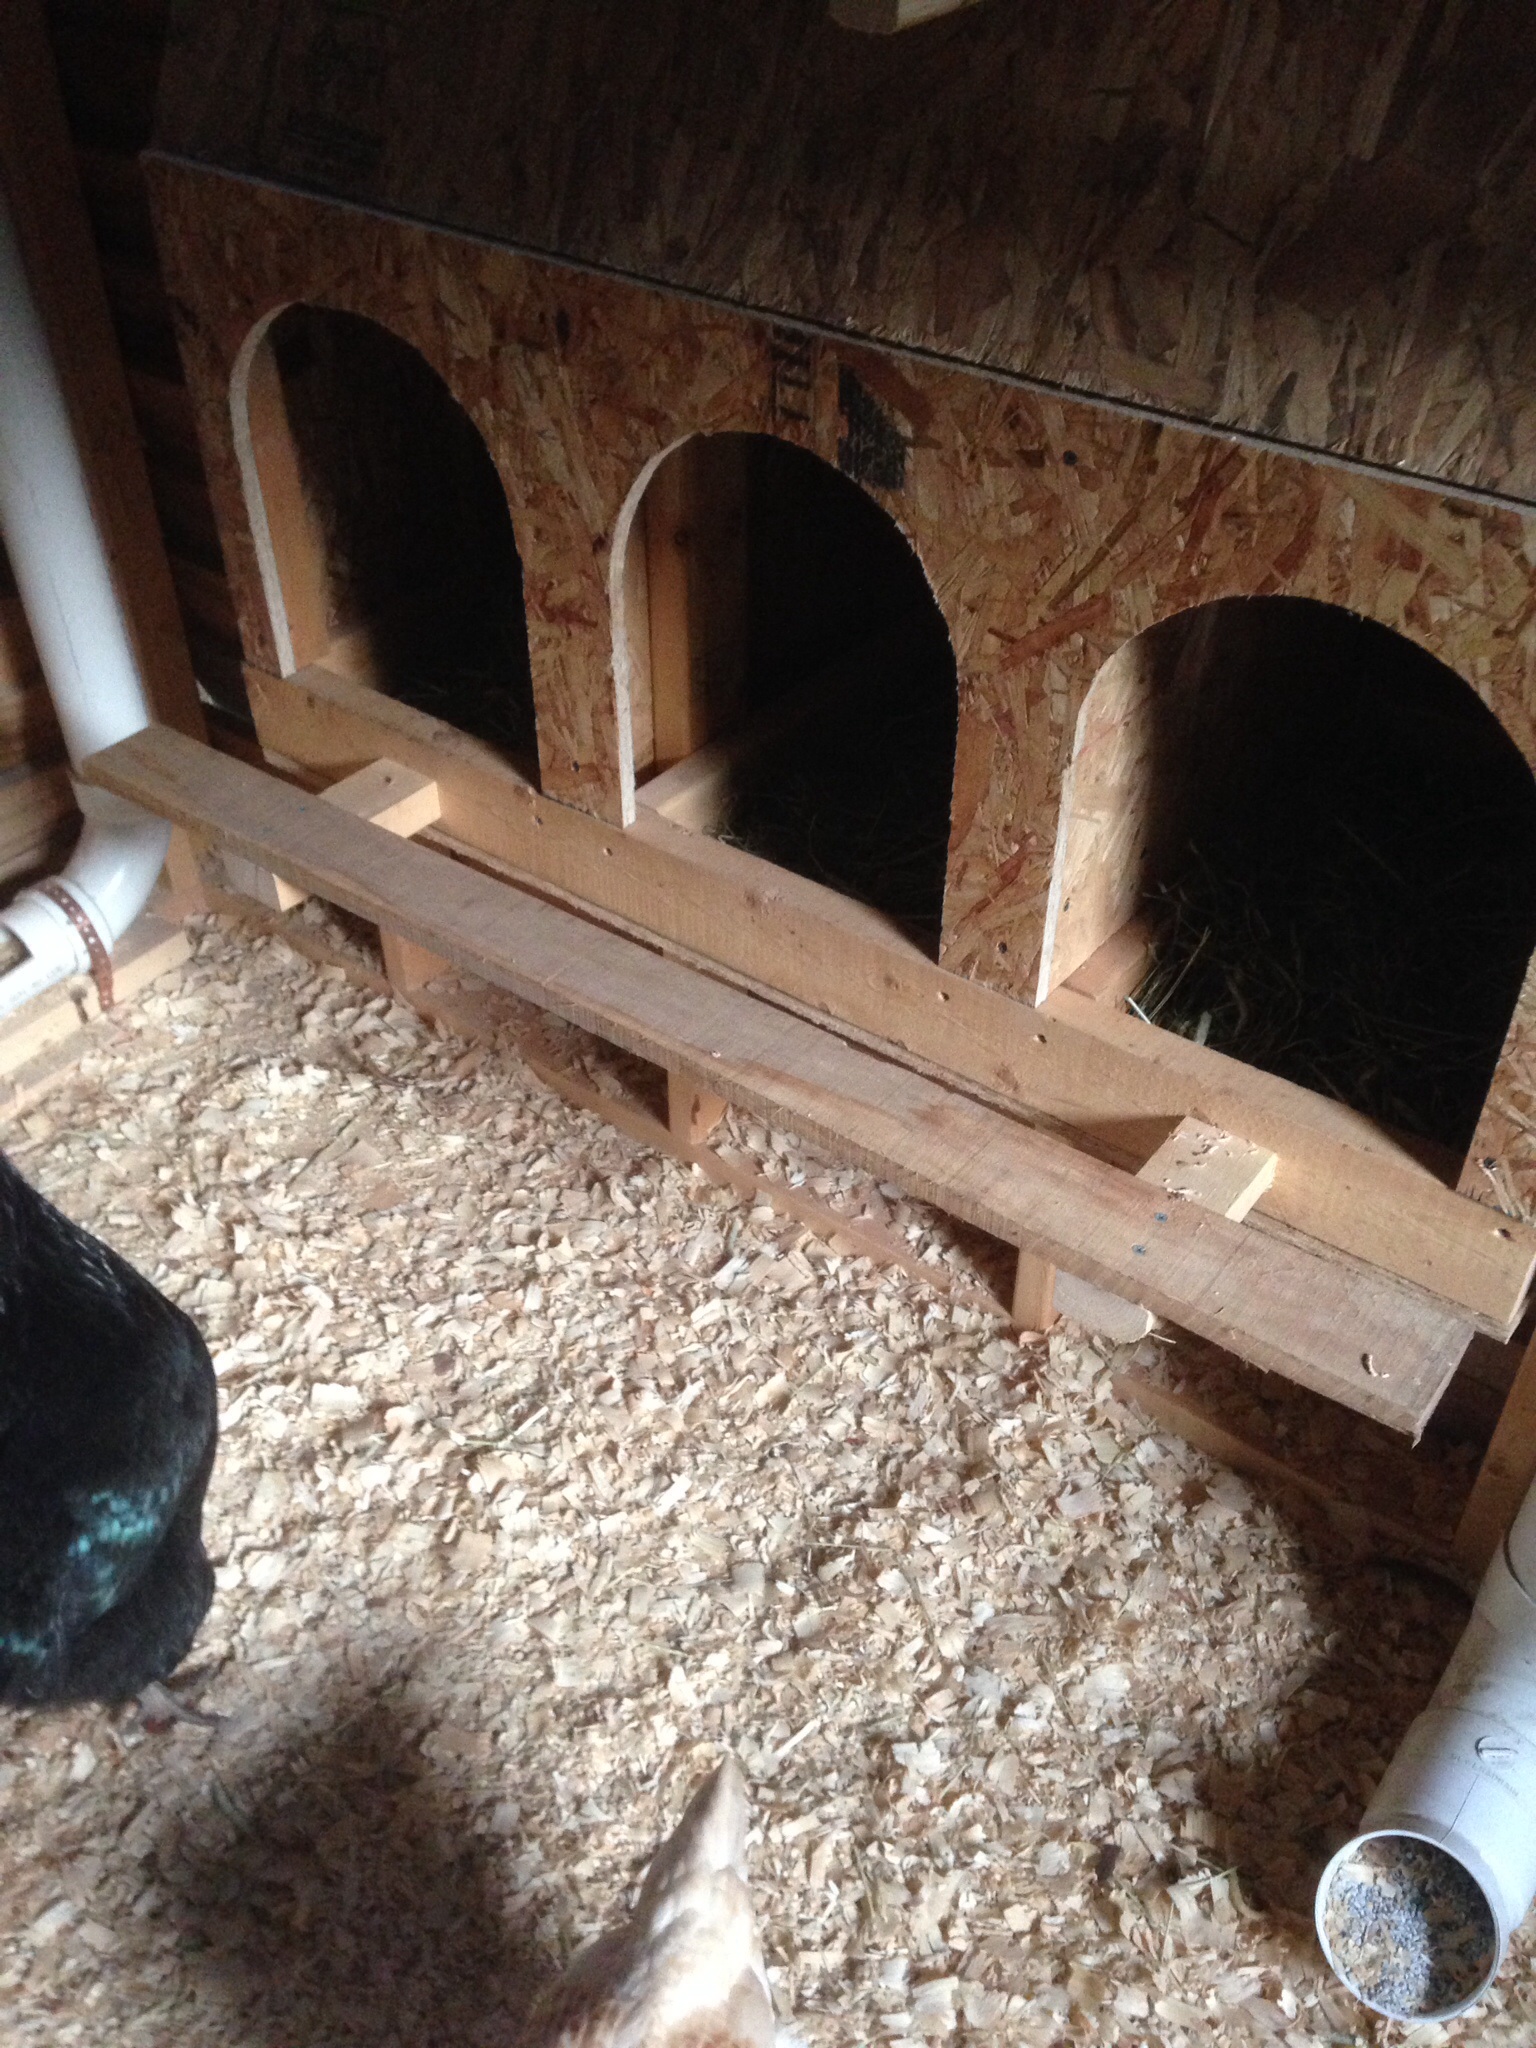 The ever evolving coop got some steps outside of the nesting boxes. The girls were thumping their heads jumping in.